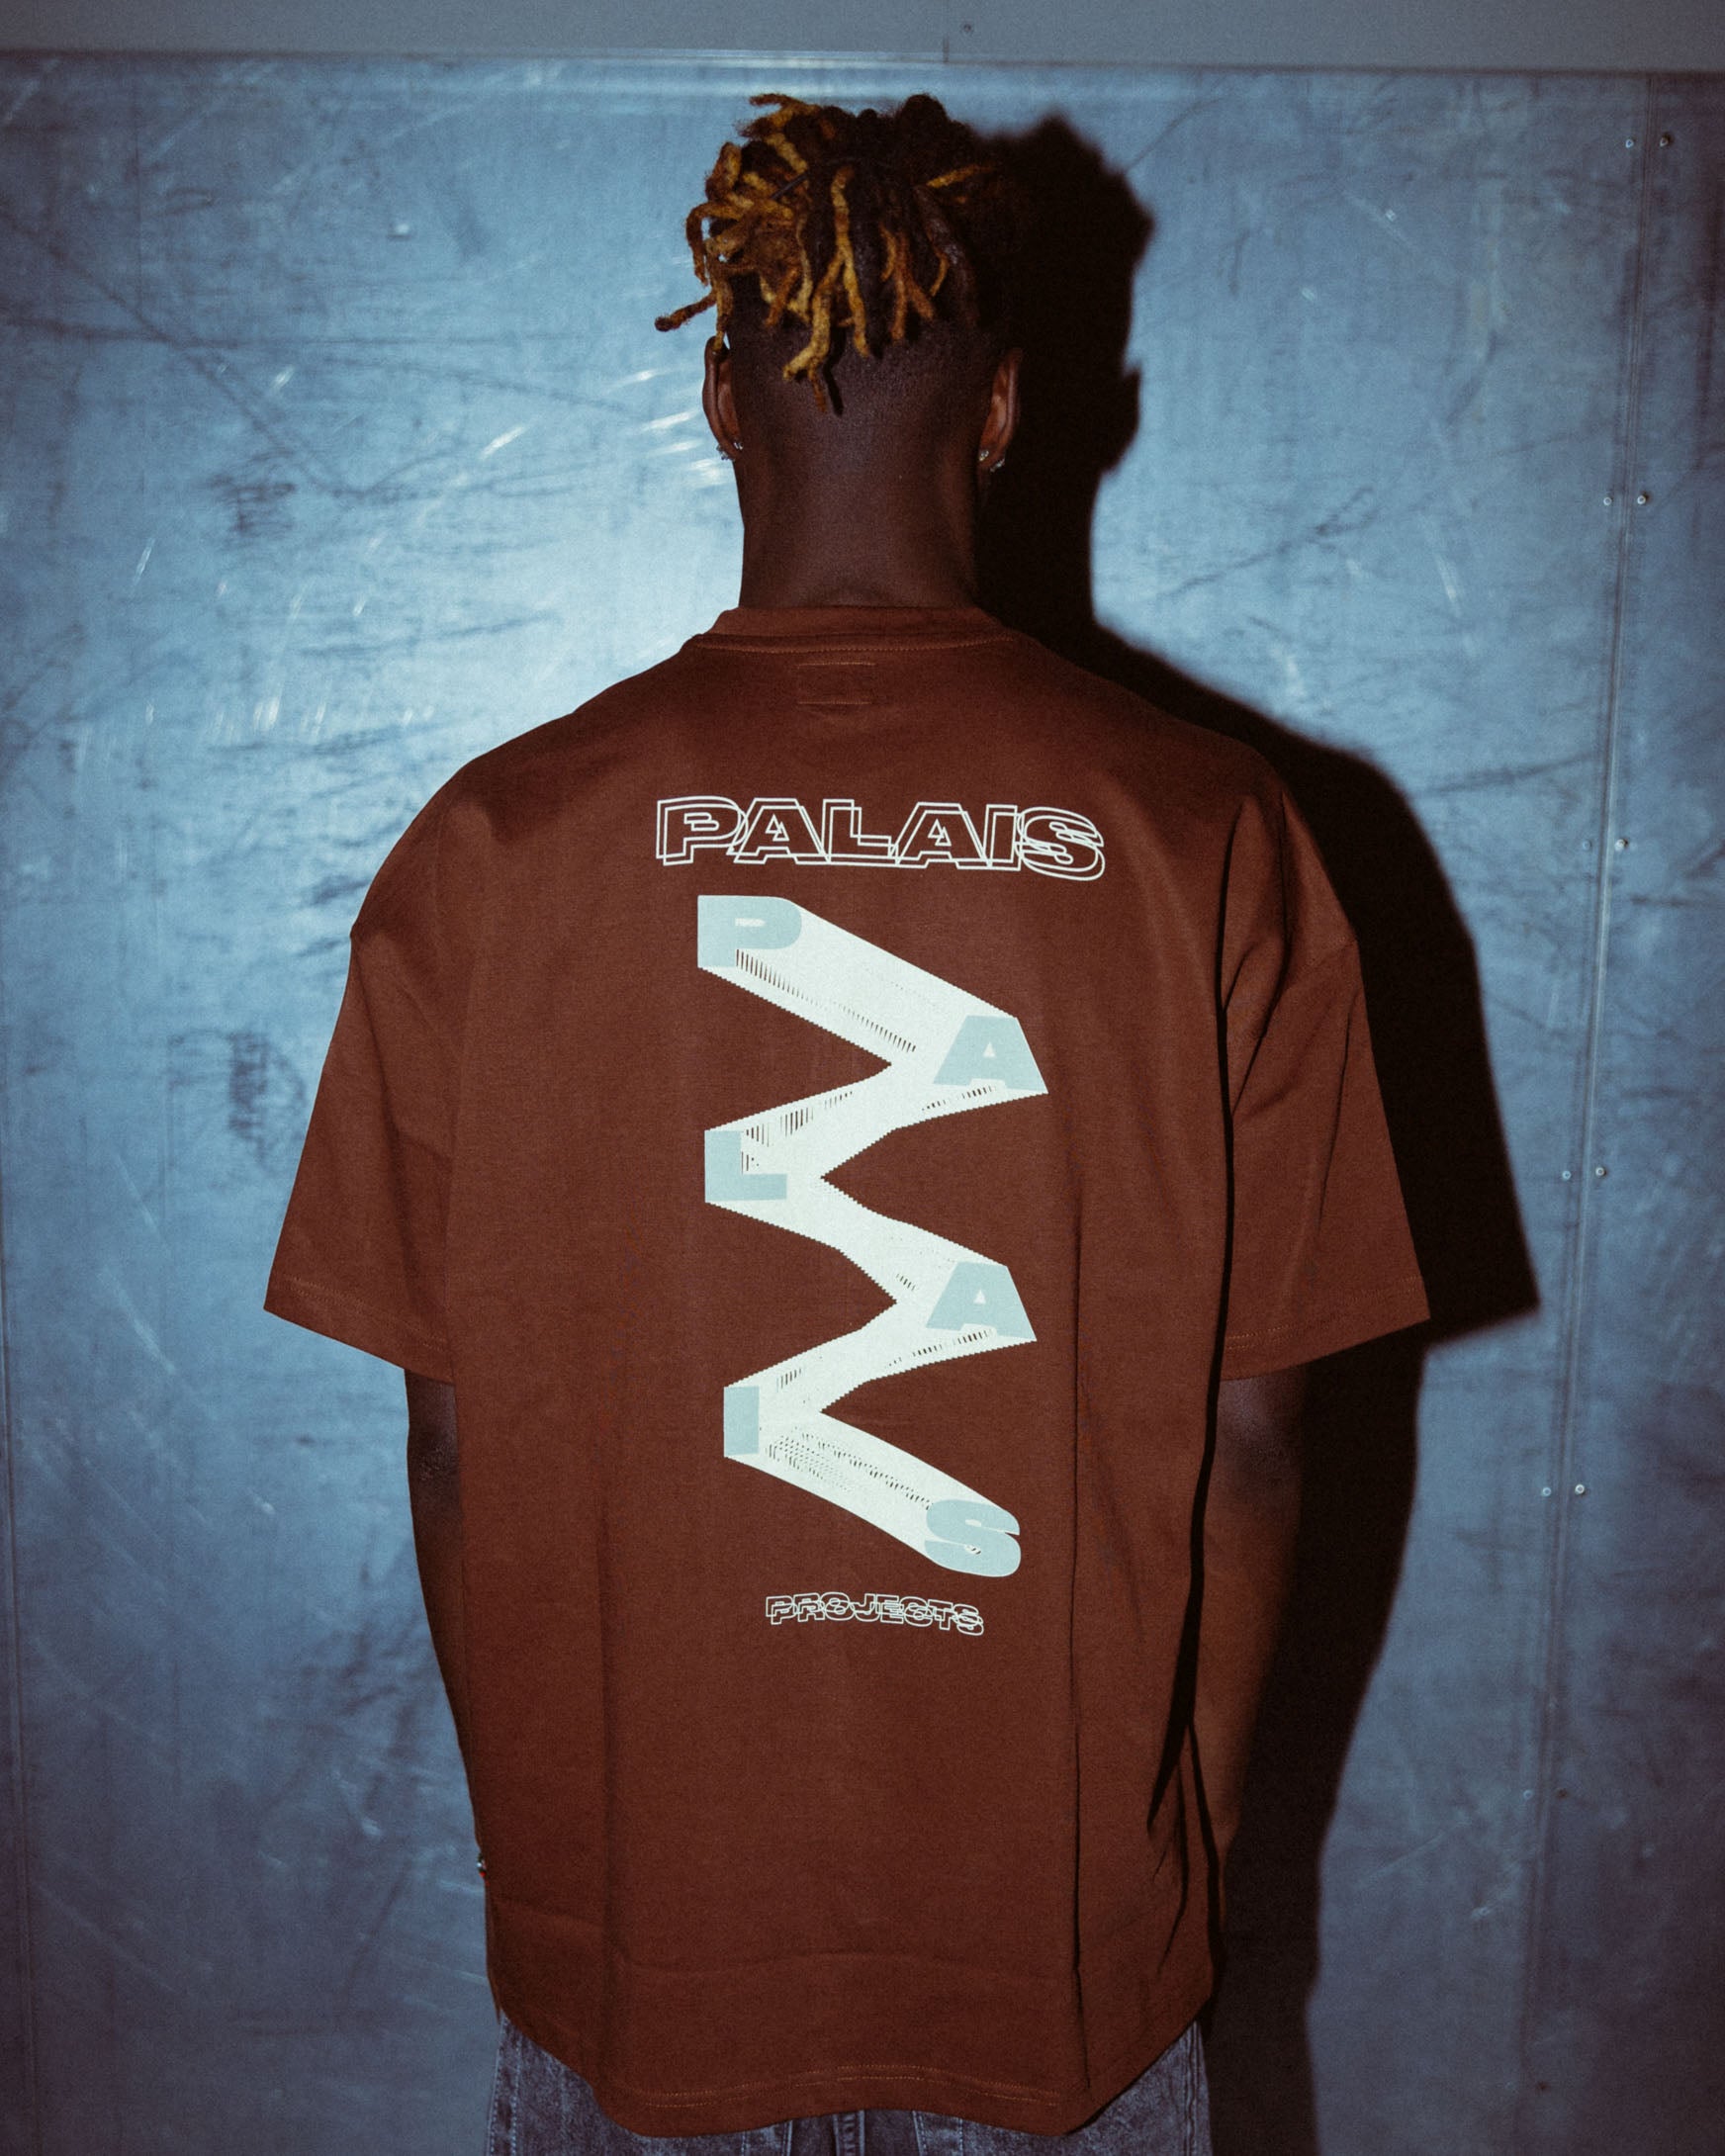 ZIGZAG TEE – Projects Palais